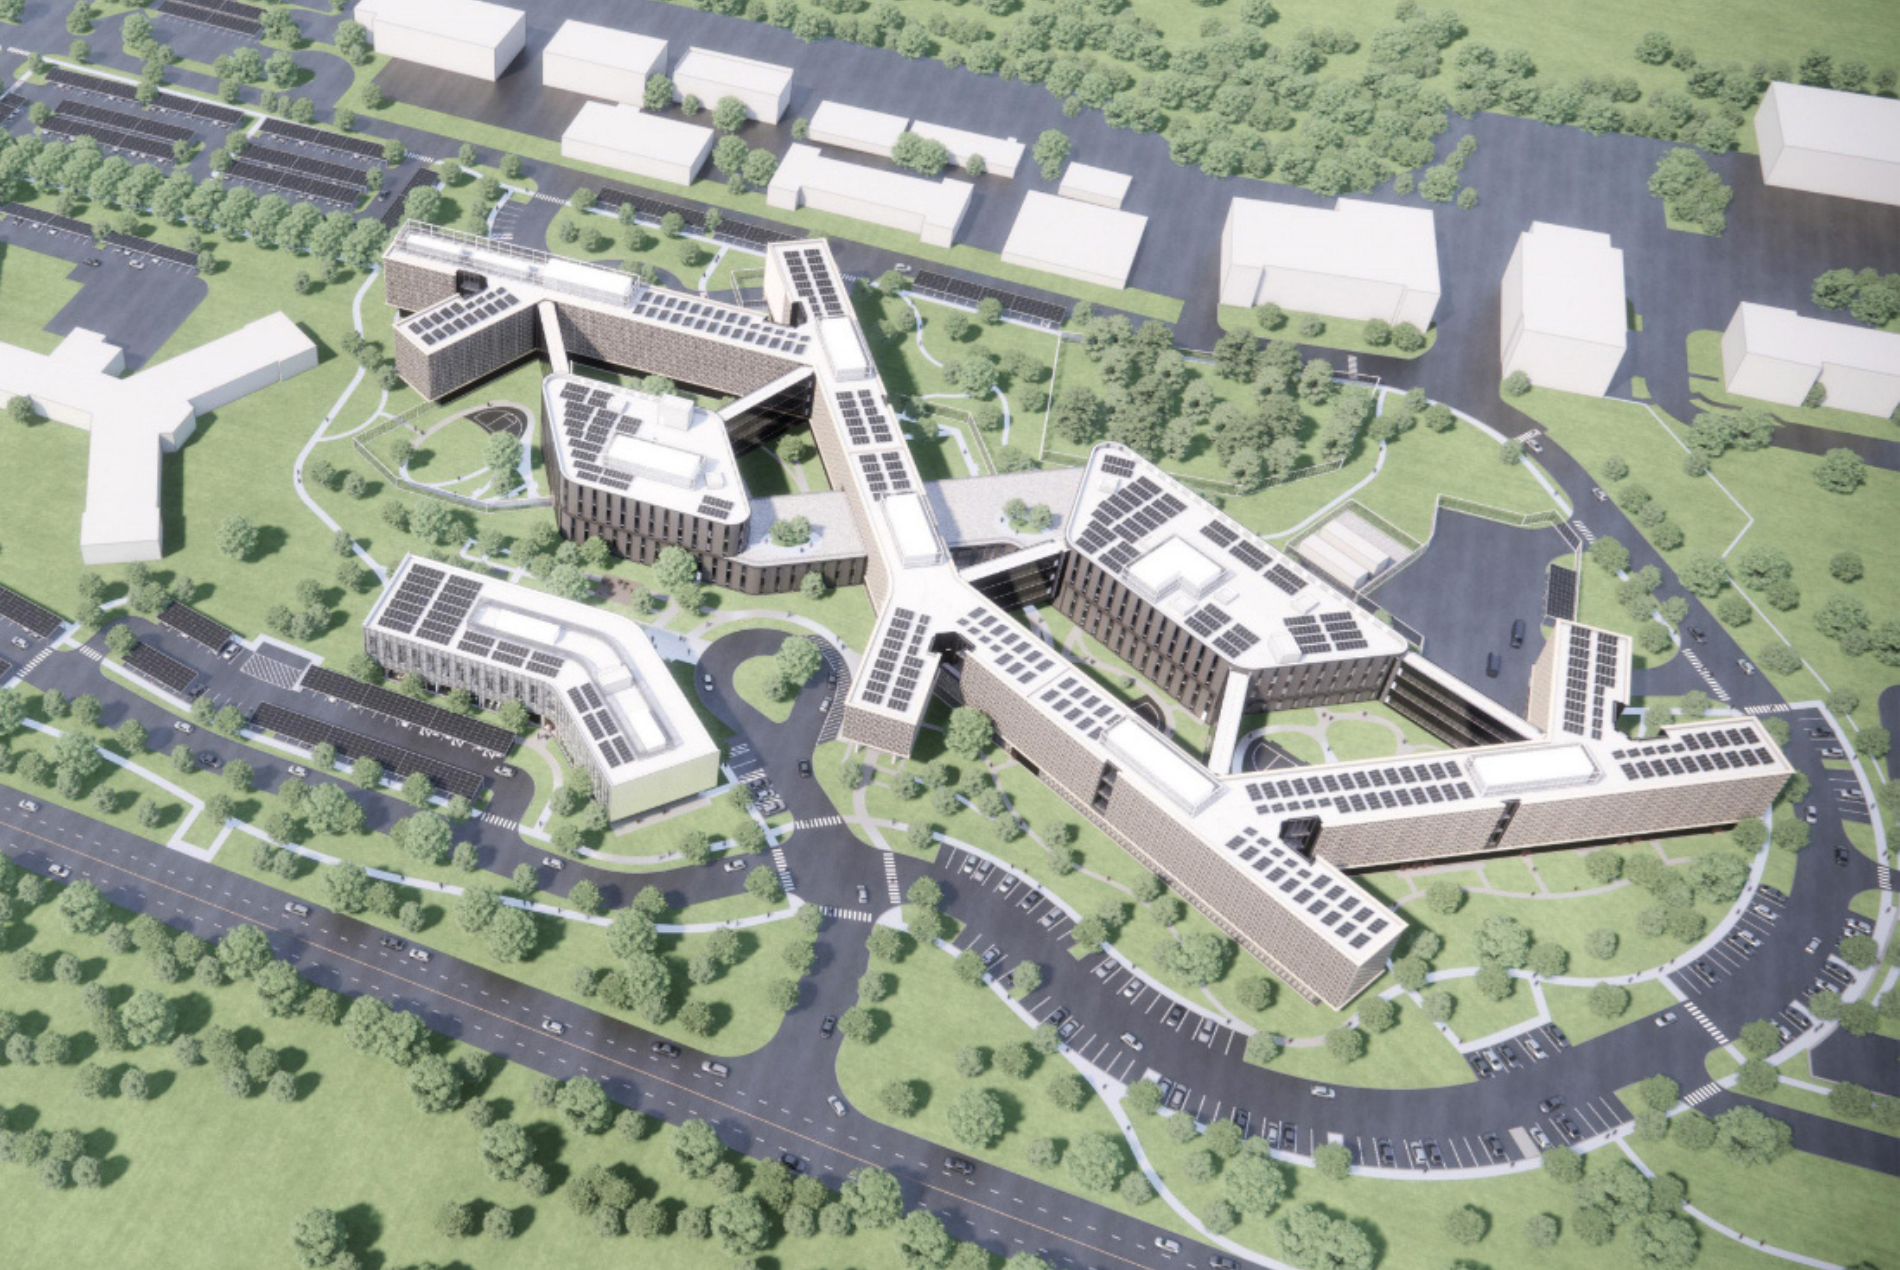 HOK to Design New Behavioral Health Facility on Western State Hospital Campus in Washington